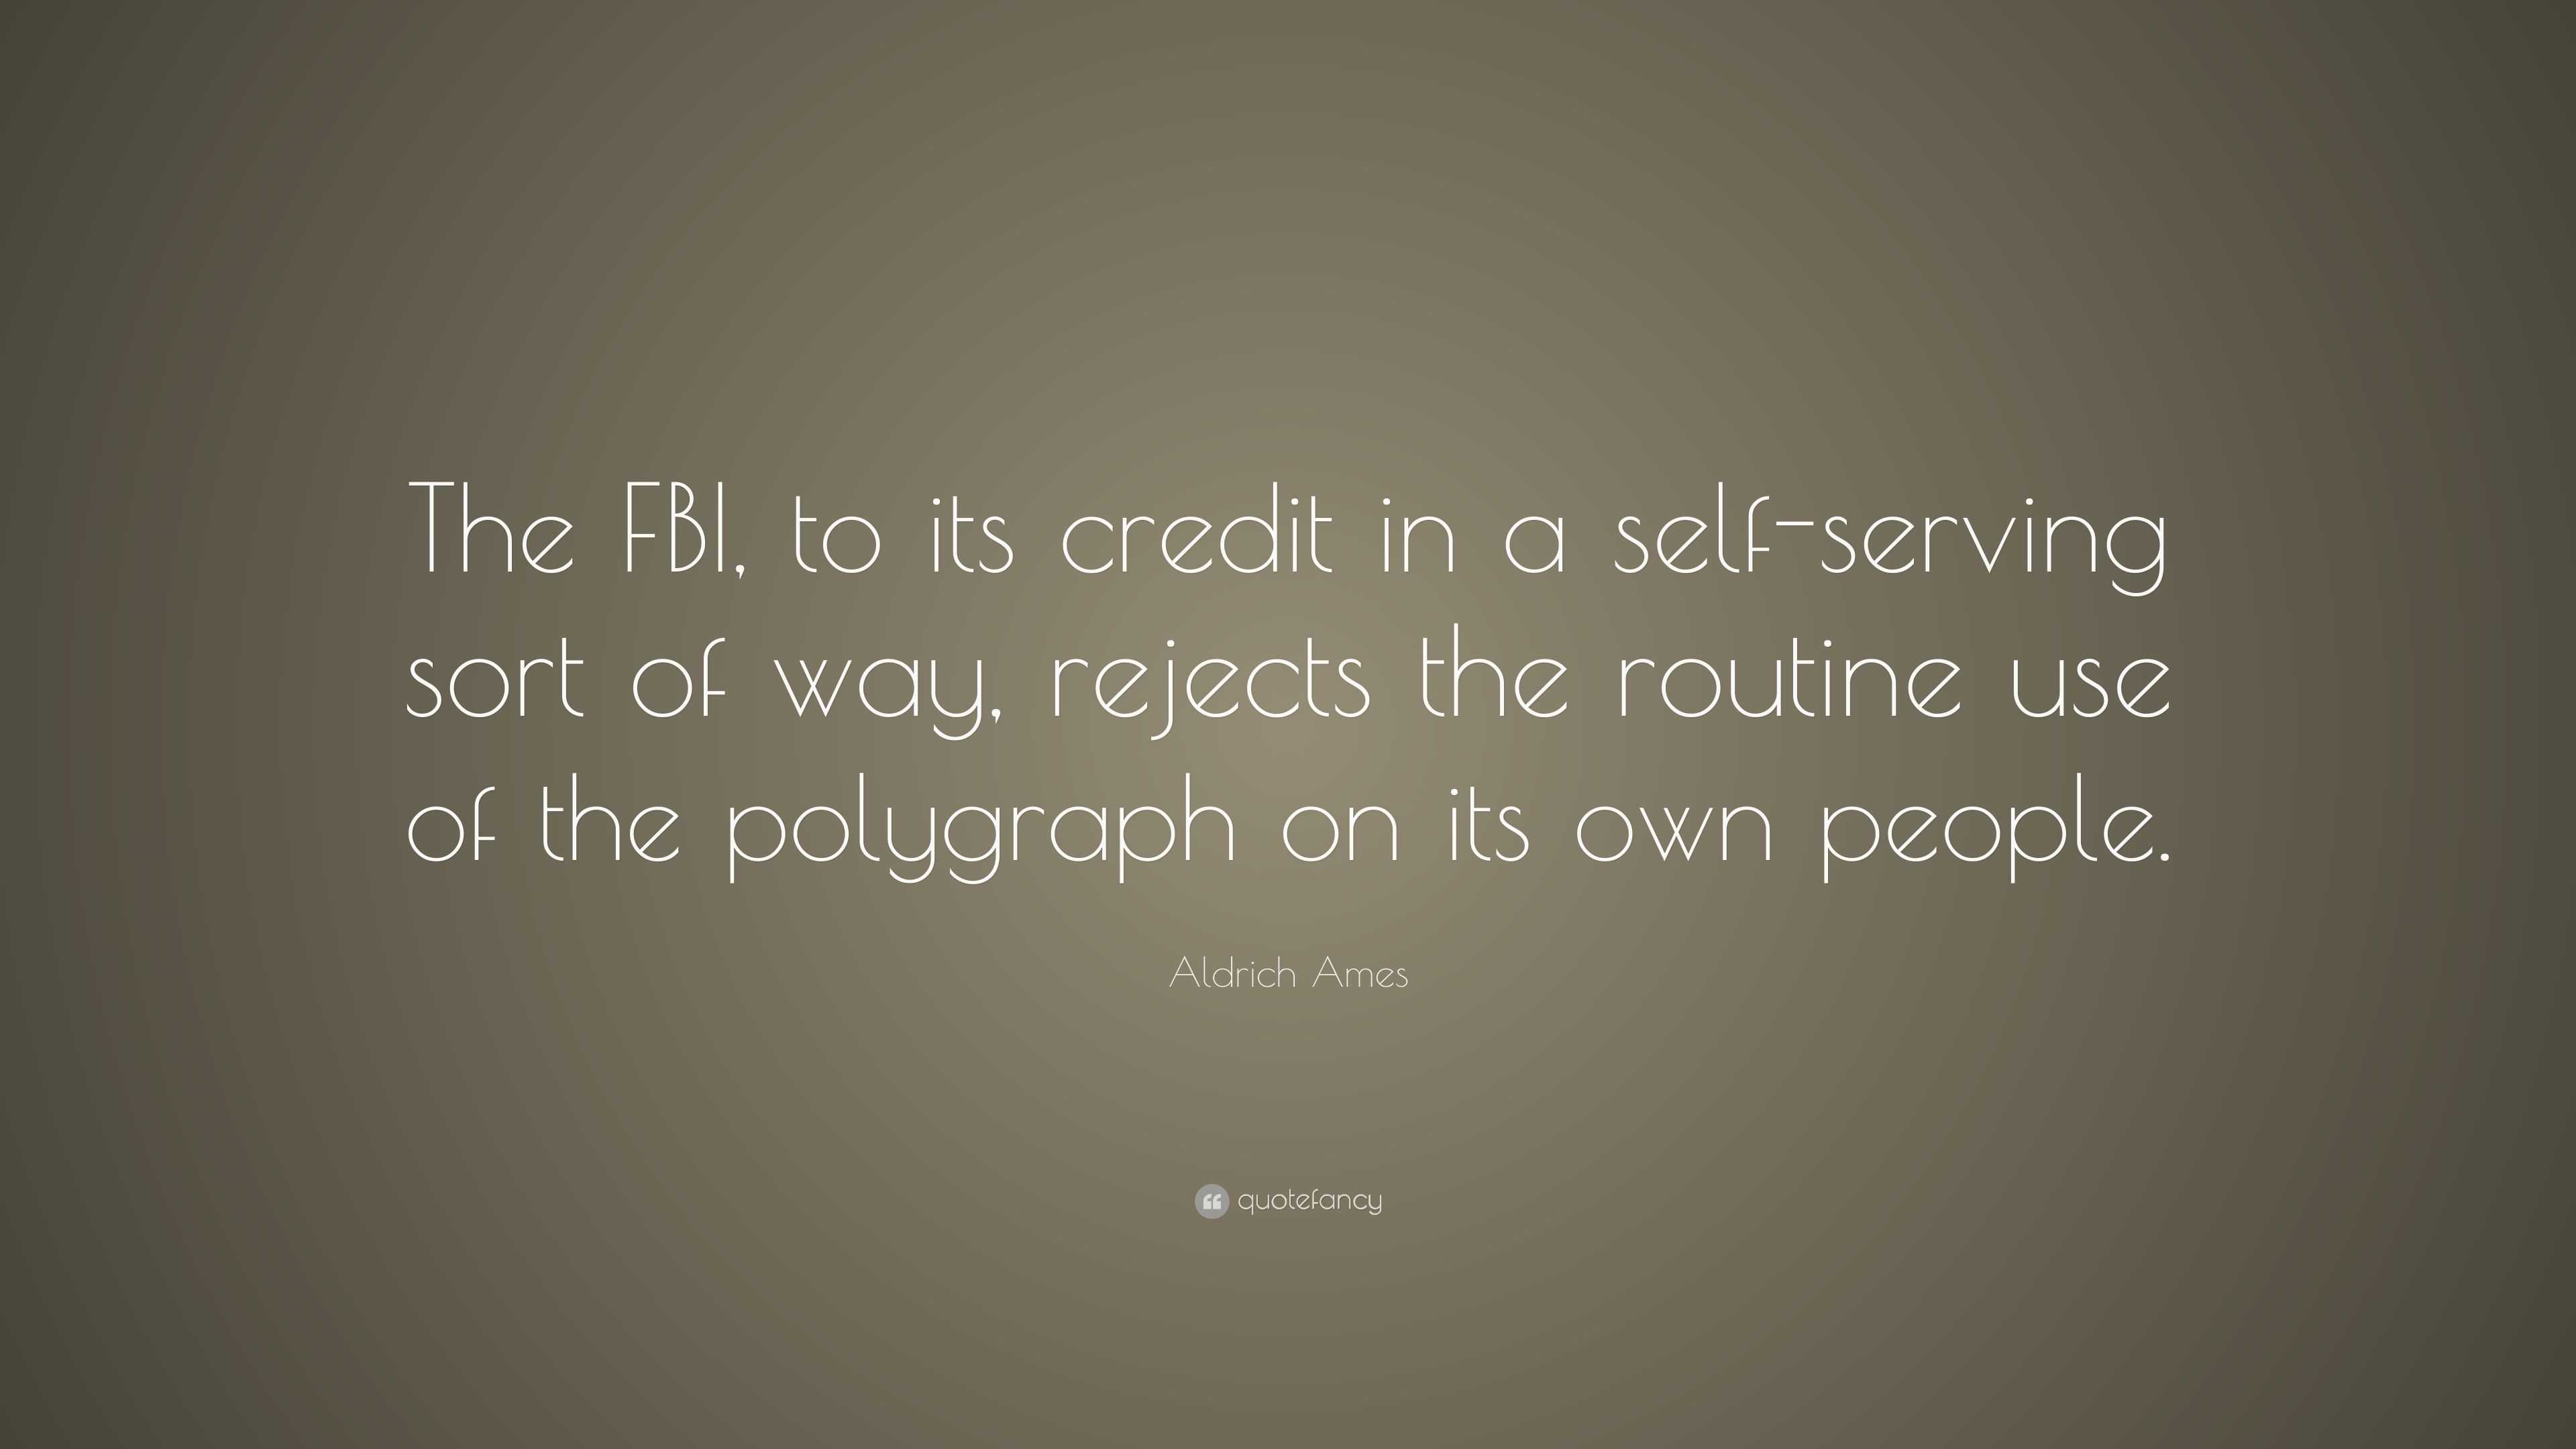 Aldrich Ames Quote: “The FBI, to its credit in a self-serving sort of ...